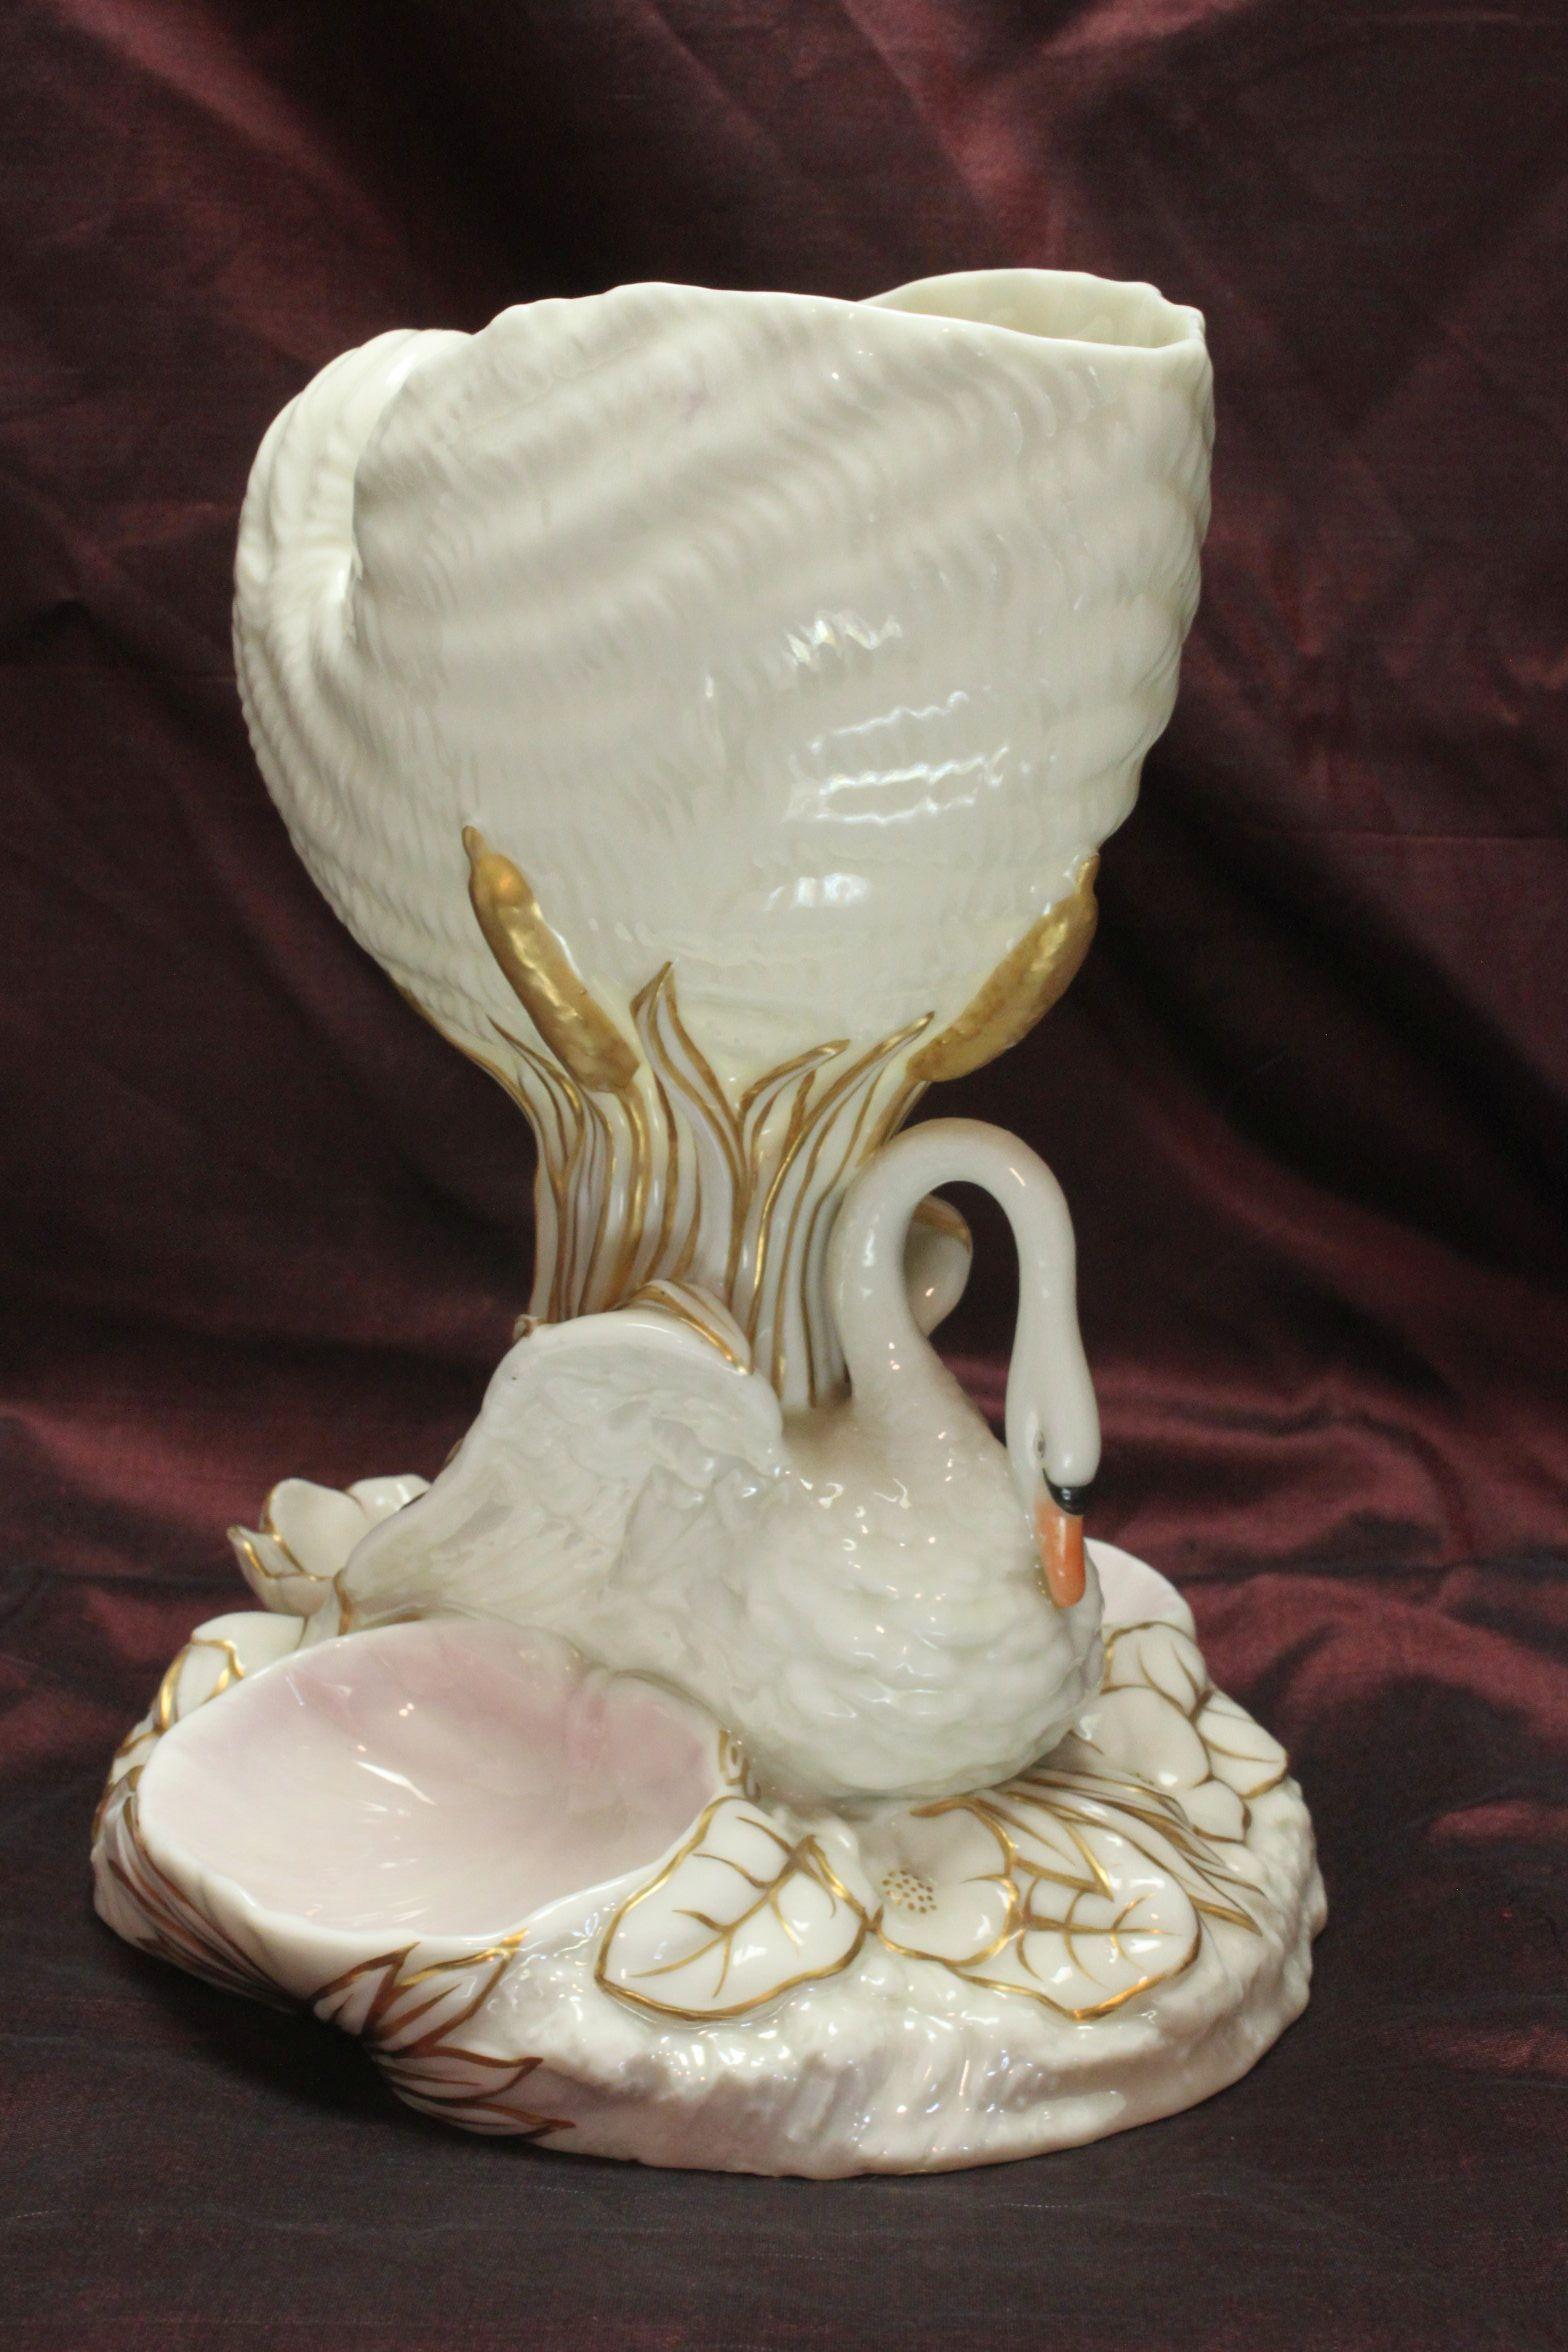 This Swan and Nautilus shell porcelain table centrepiece by Royal Worcester could also be used as a vase - either way, filled with fresh flowers it would look fabulous. The nautilus shell is supported by bulrushes and the swan, which sits amongst